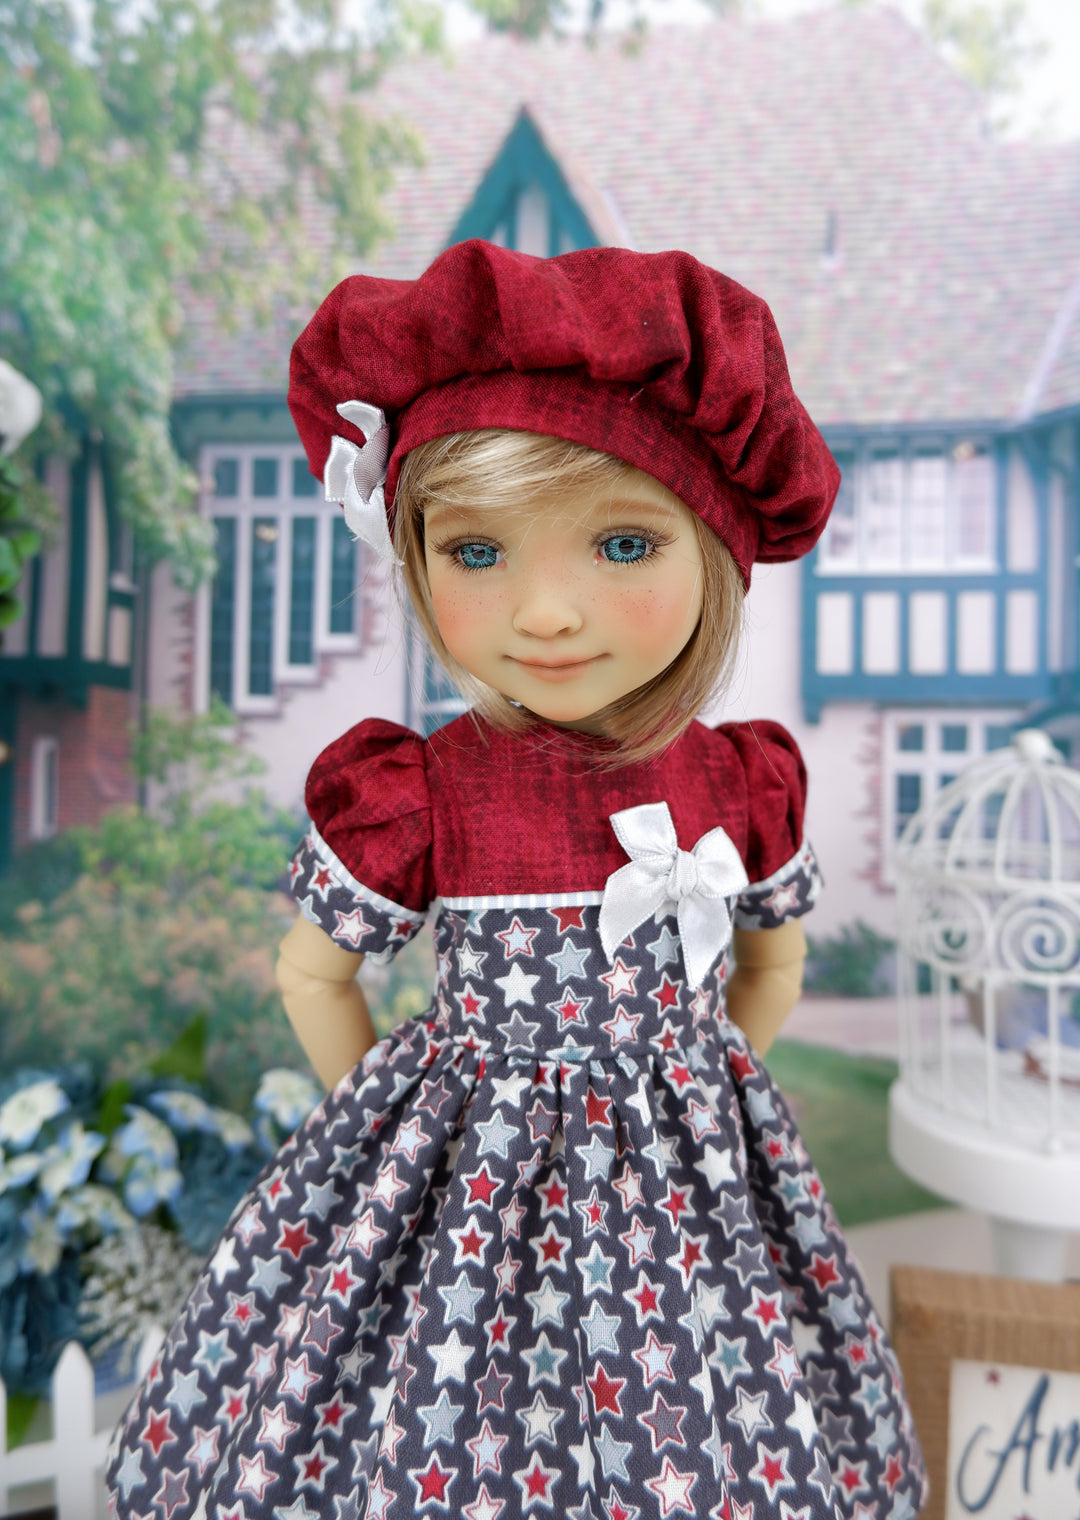 Vintage Stars - dress and shoes for Ruby Red Fashion Friends doll